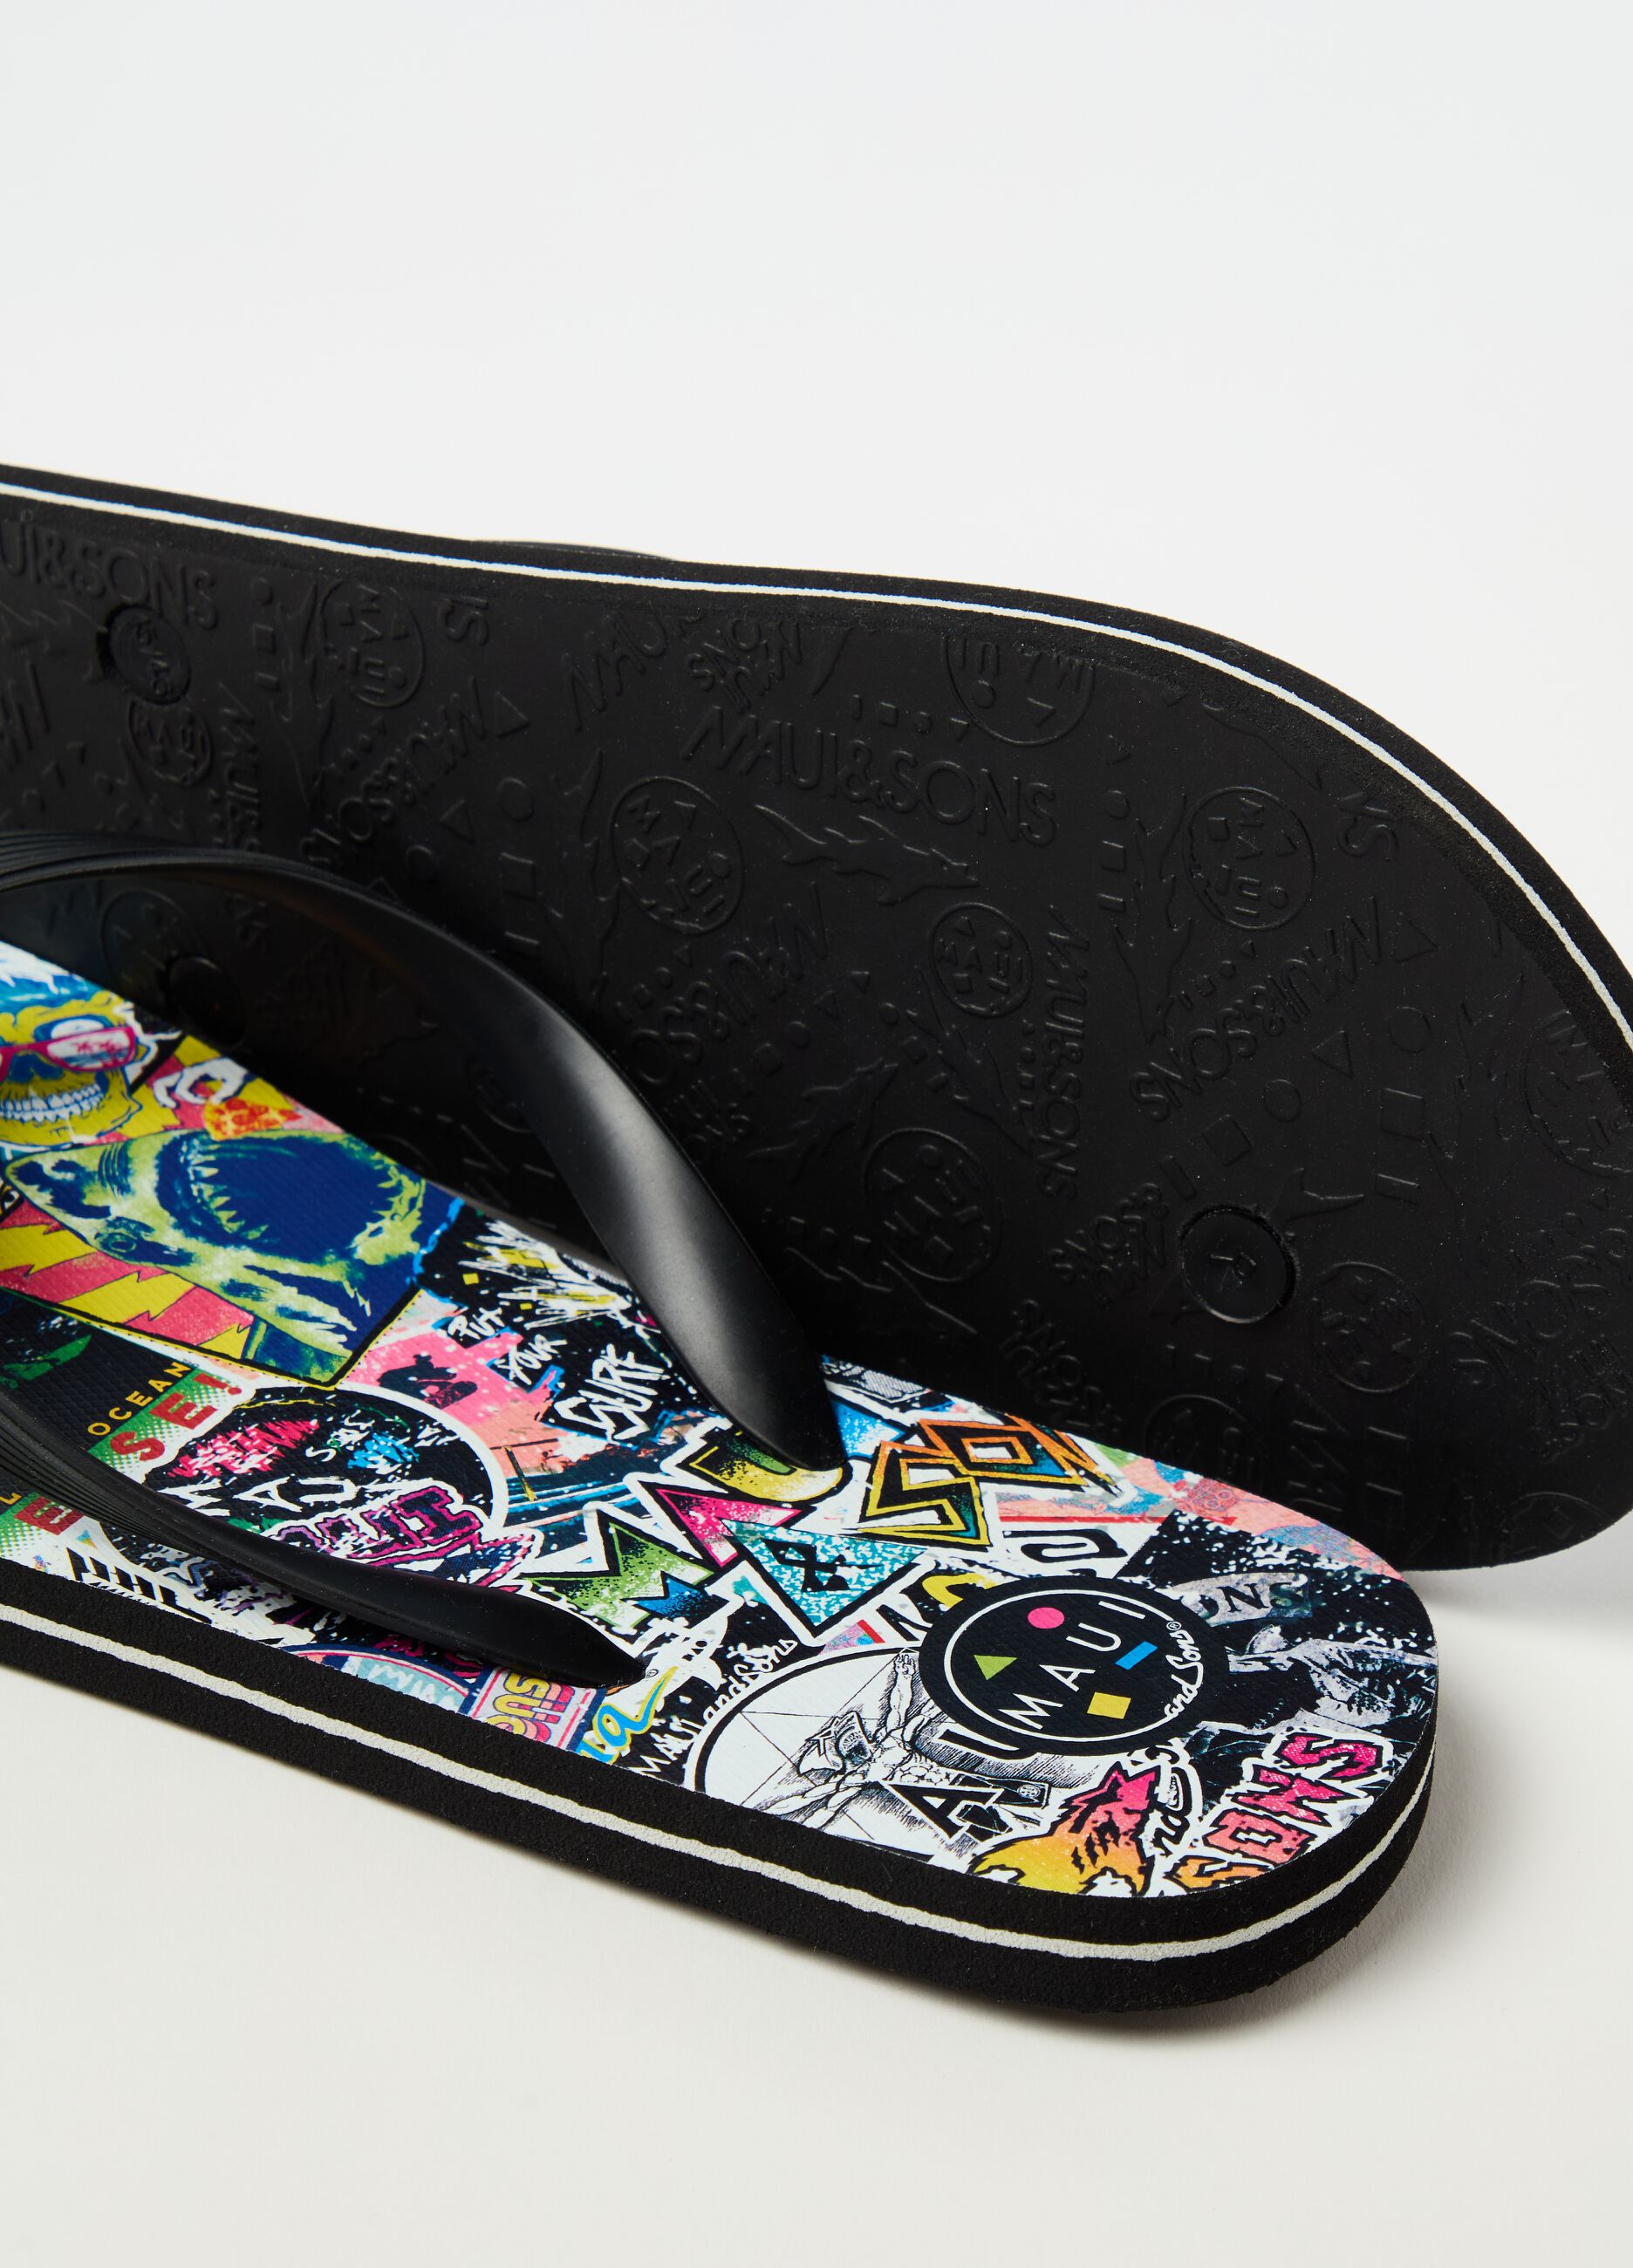 Thong sandals with graffiti-style print